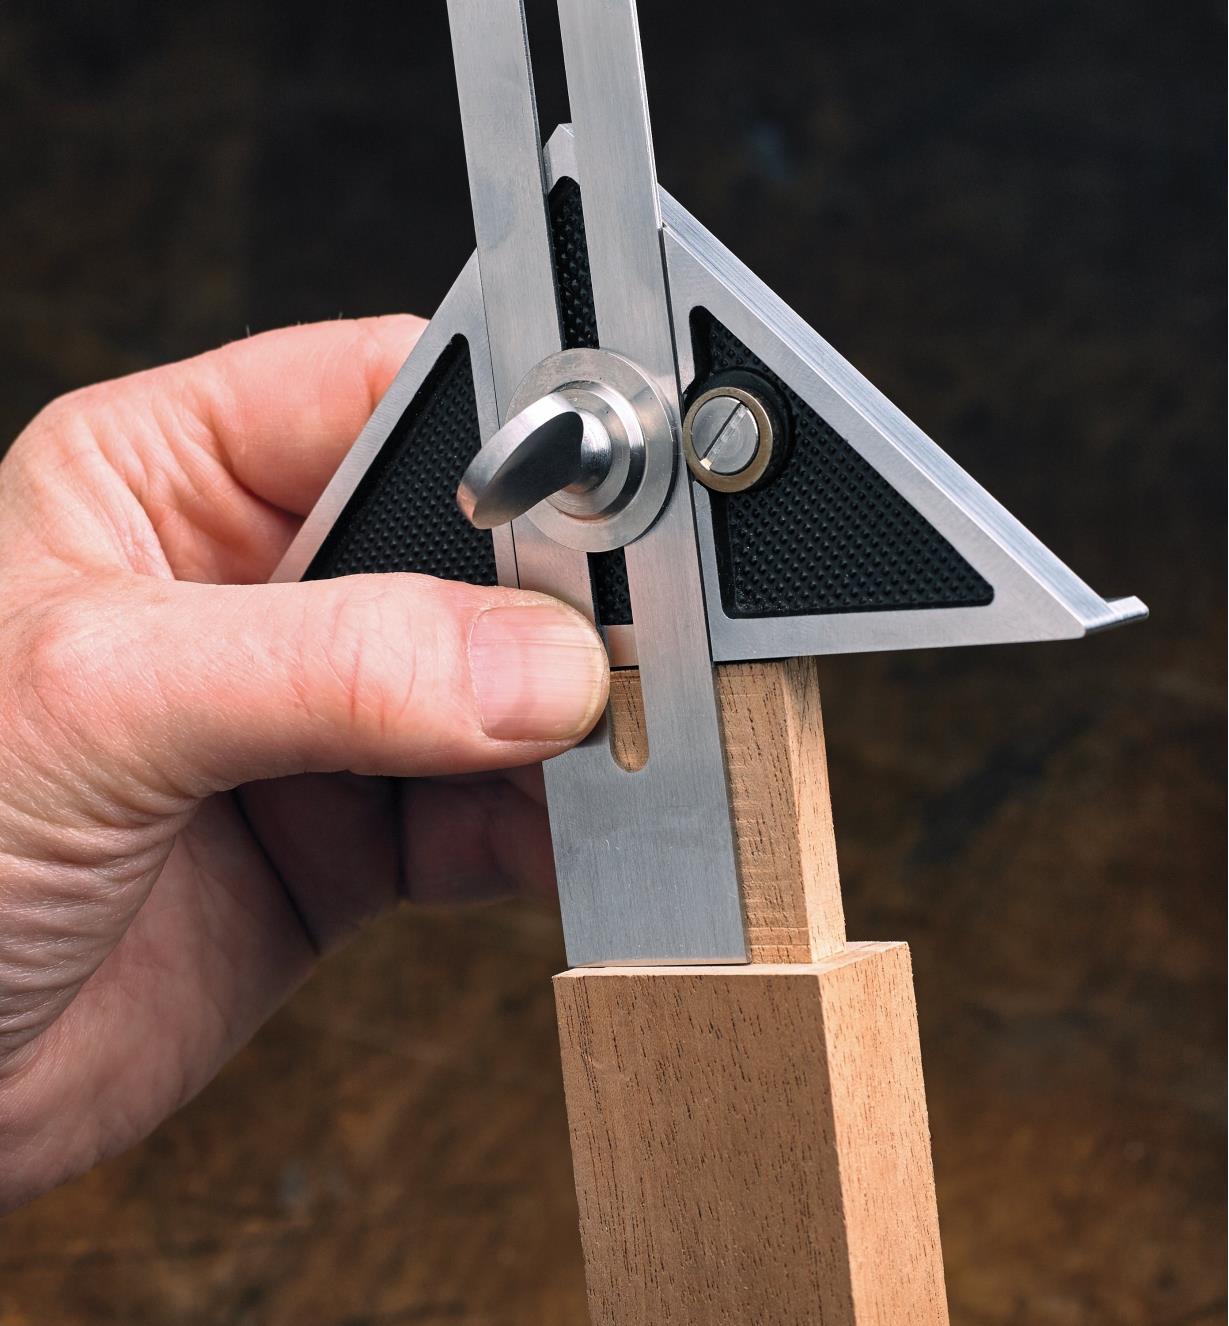 Referencing the depth of a tenon using the Lee Valley replica bevel square